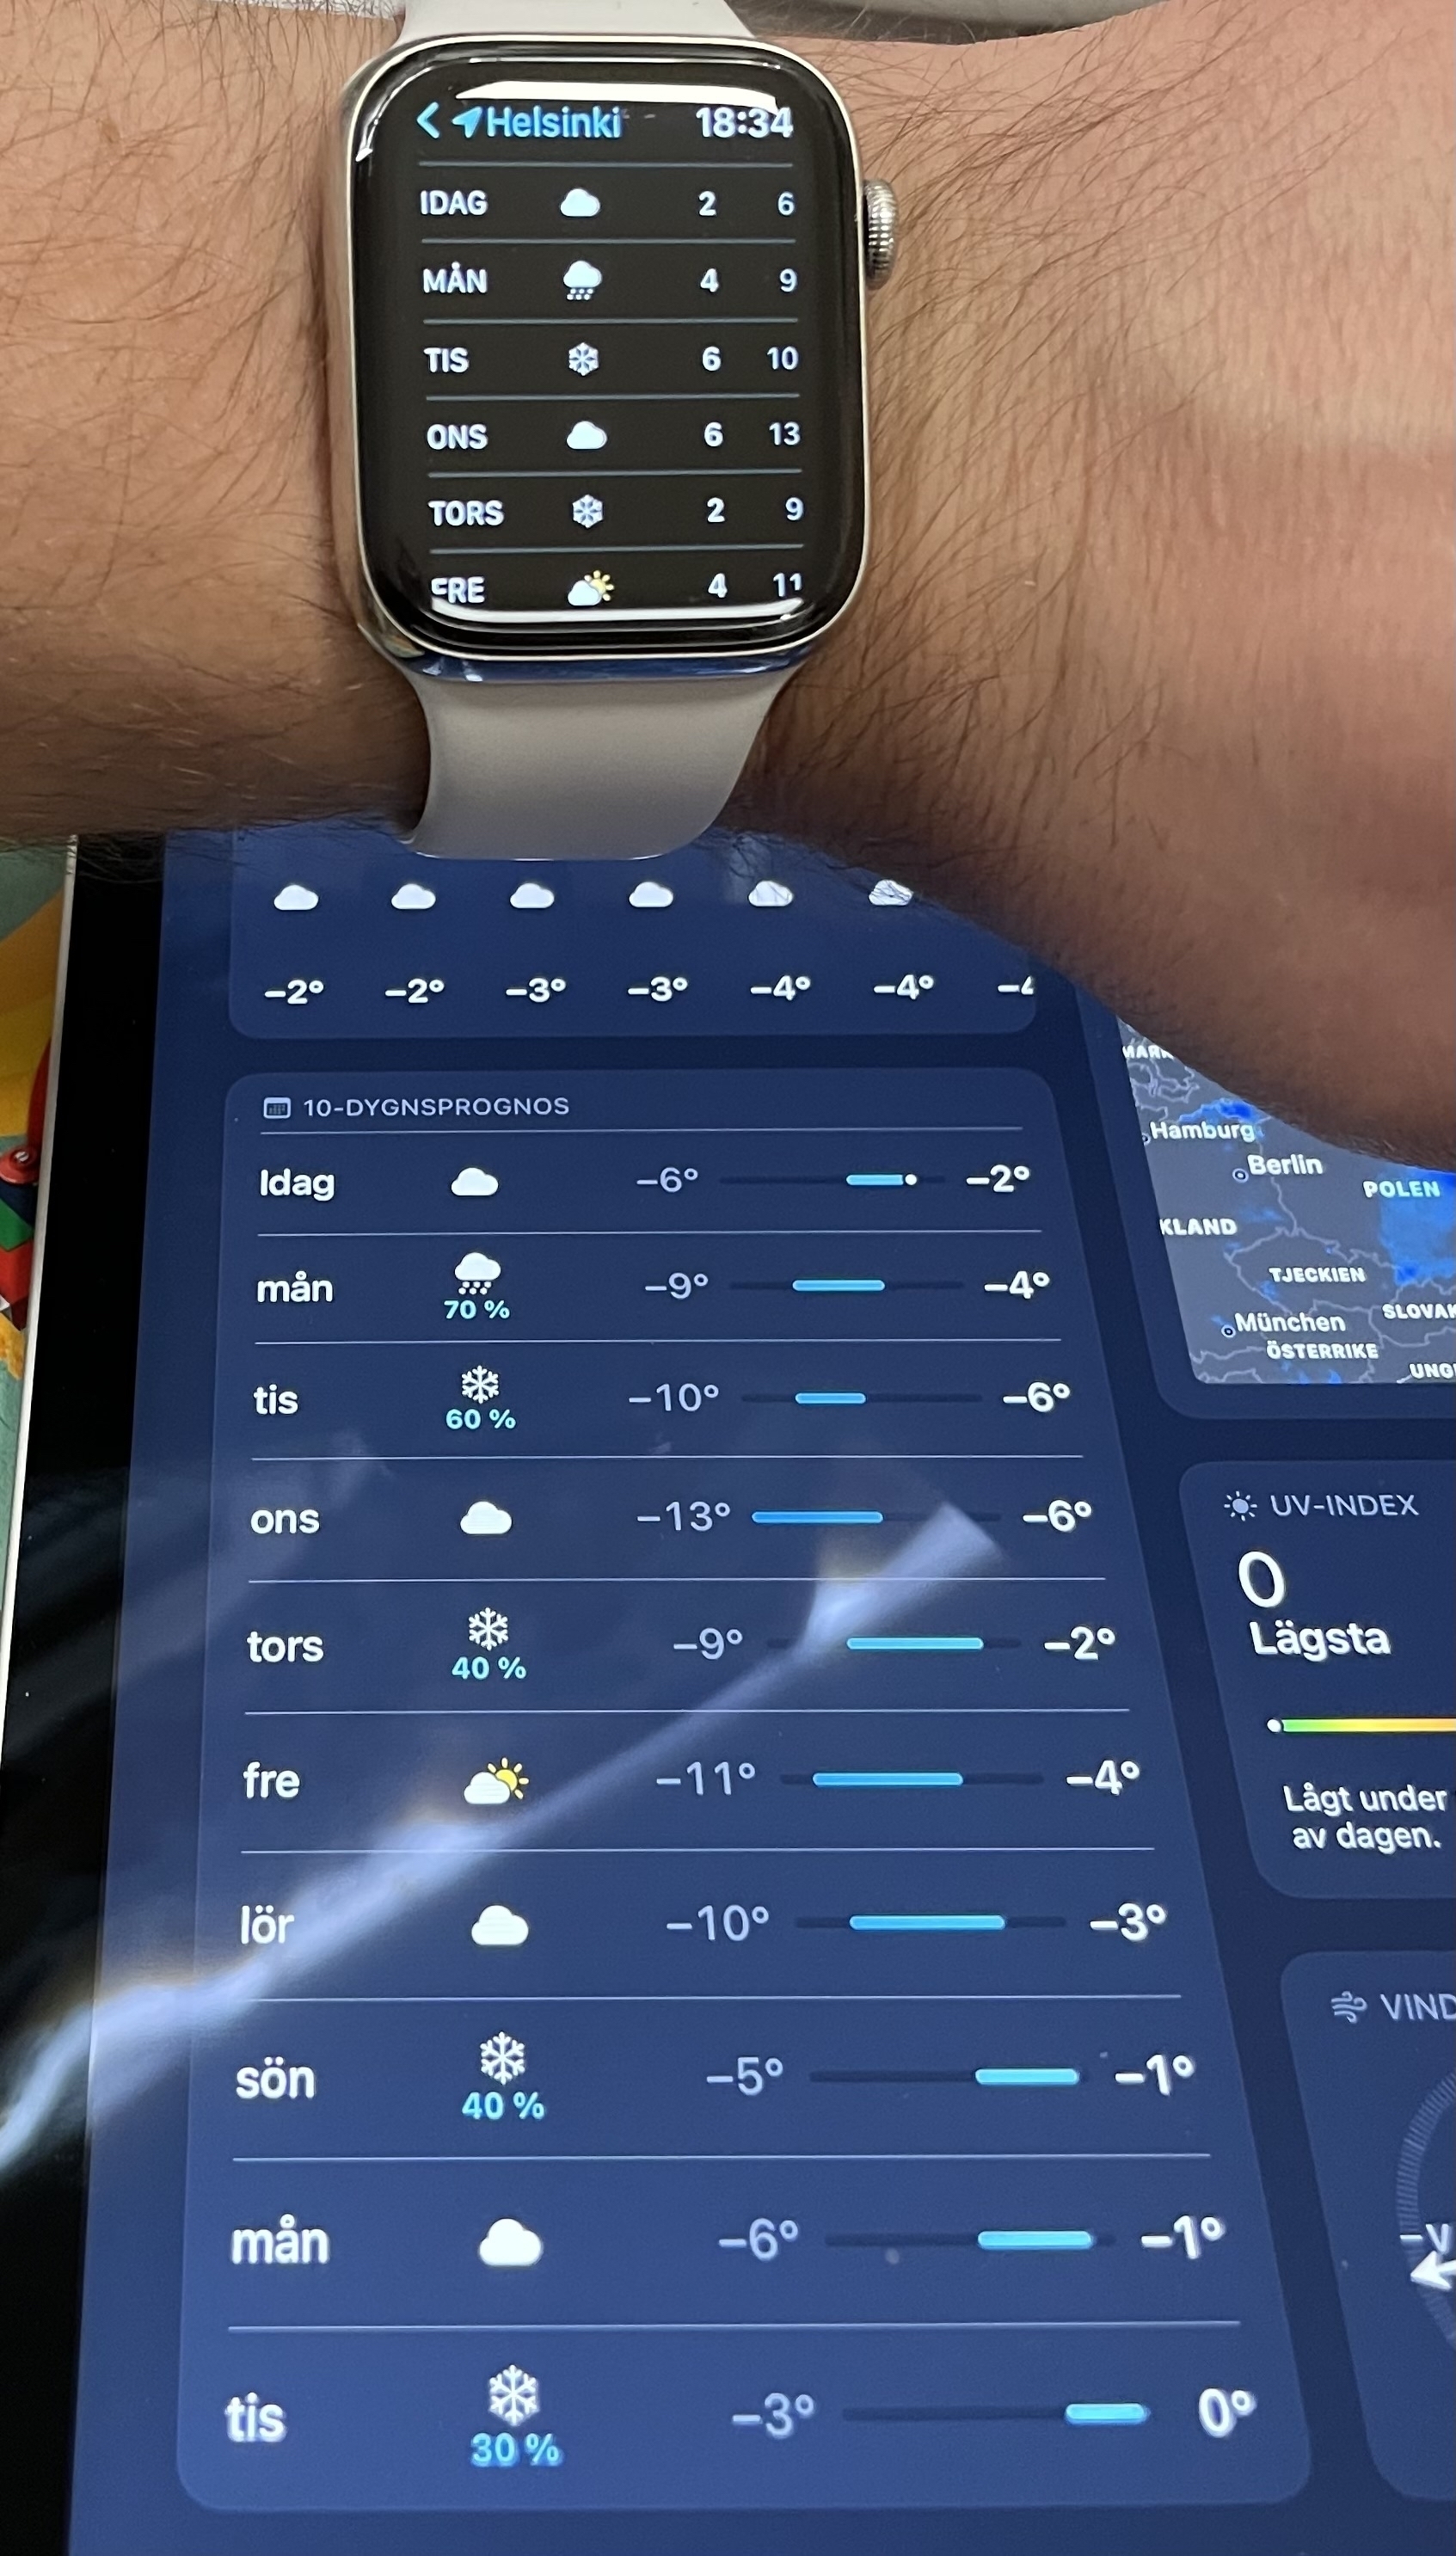 Apple Watch showing the Weather app forecast for the next few days, above an iPad showing the Weather app for the same days. The iPad shows all-minus temperatures, while the watch shows the same temperatures, but without minus sign. 